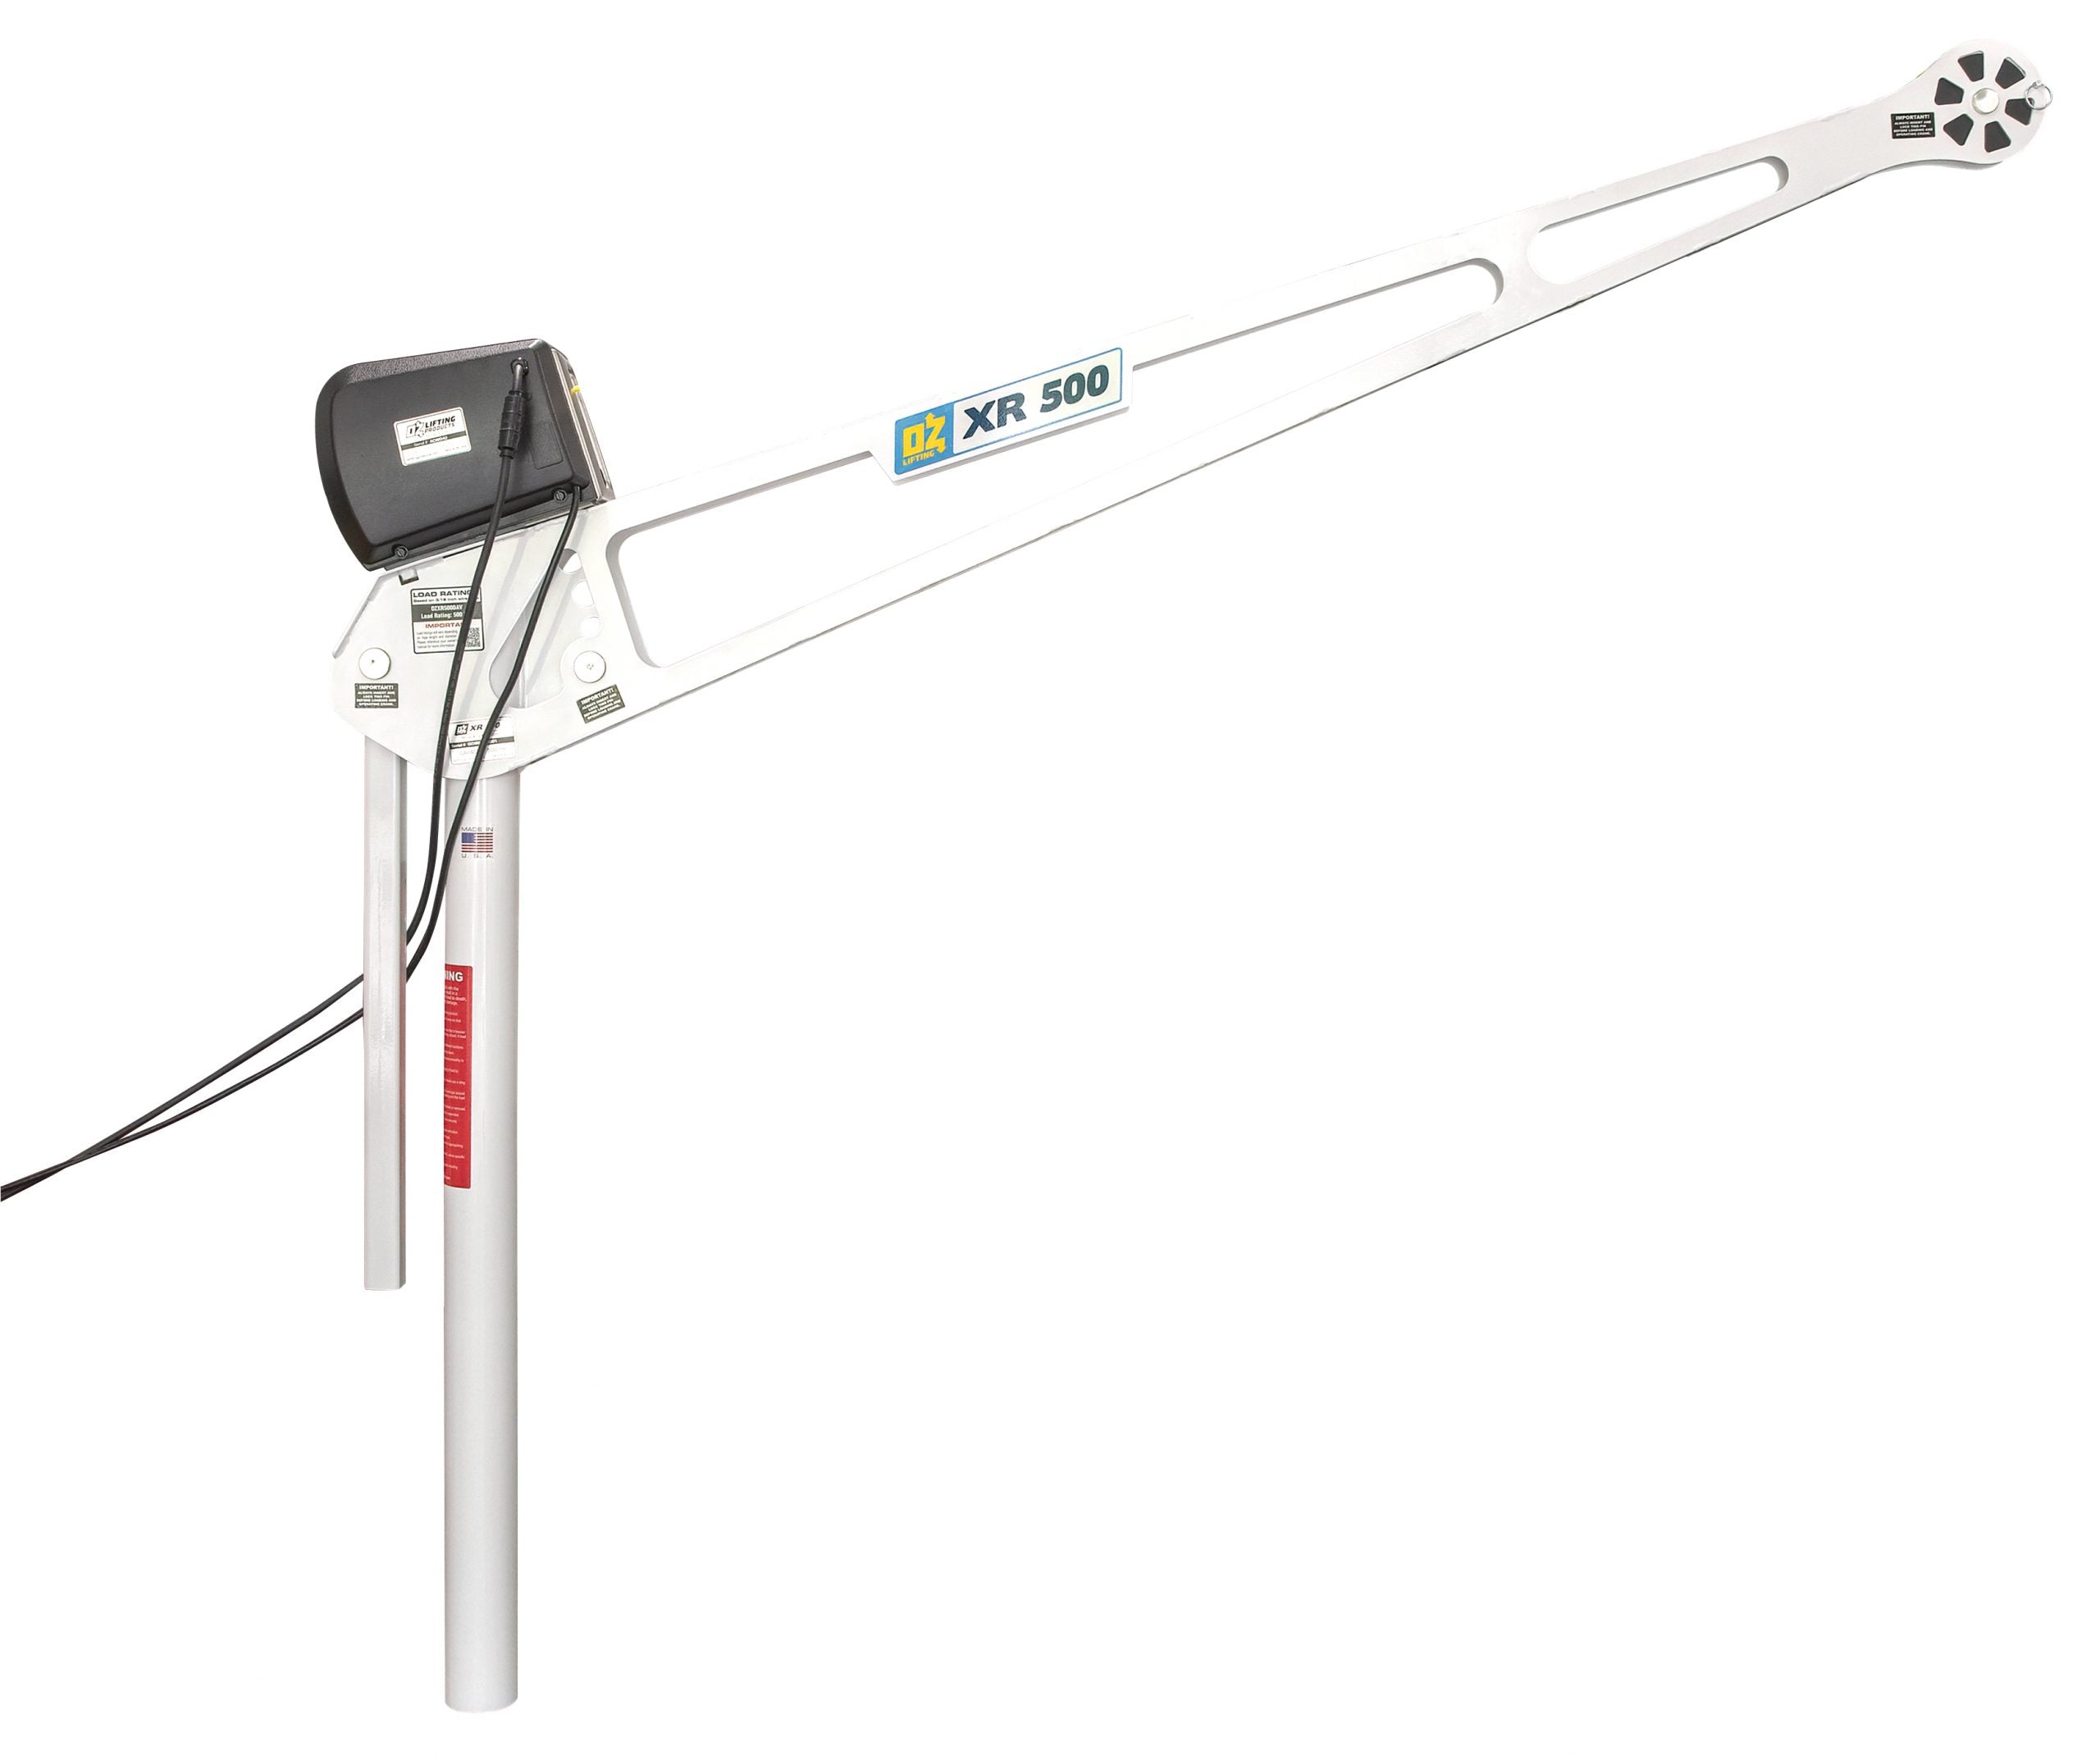 OZ Lifting XR Series Davit Crane with DC Electric Winch for Lifting Dinghies